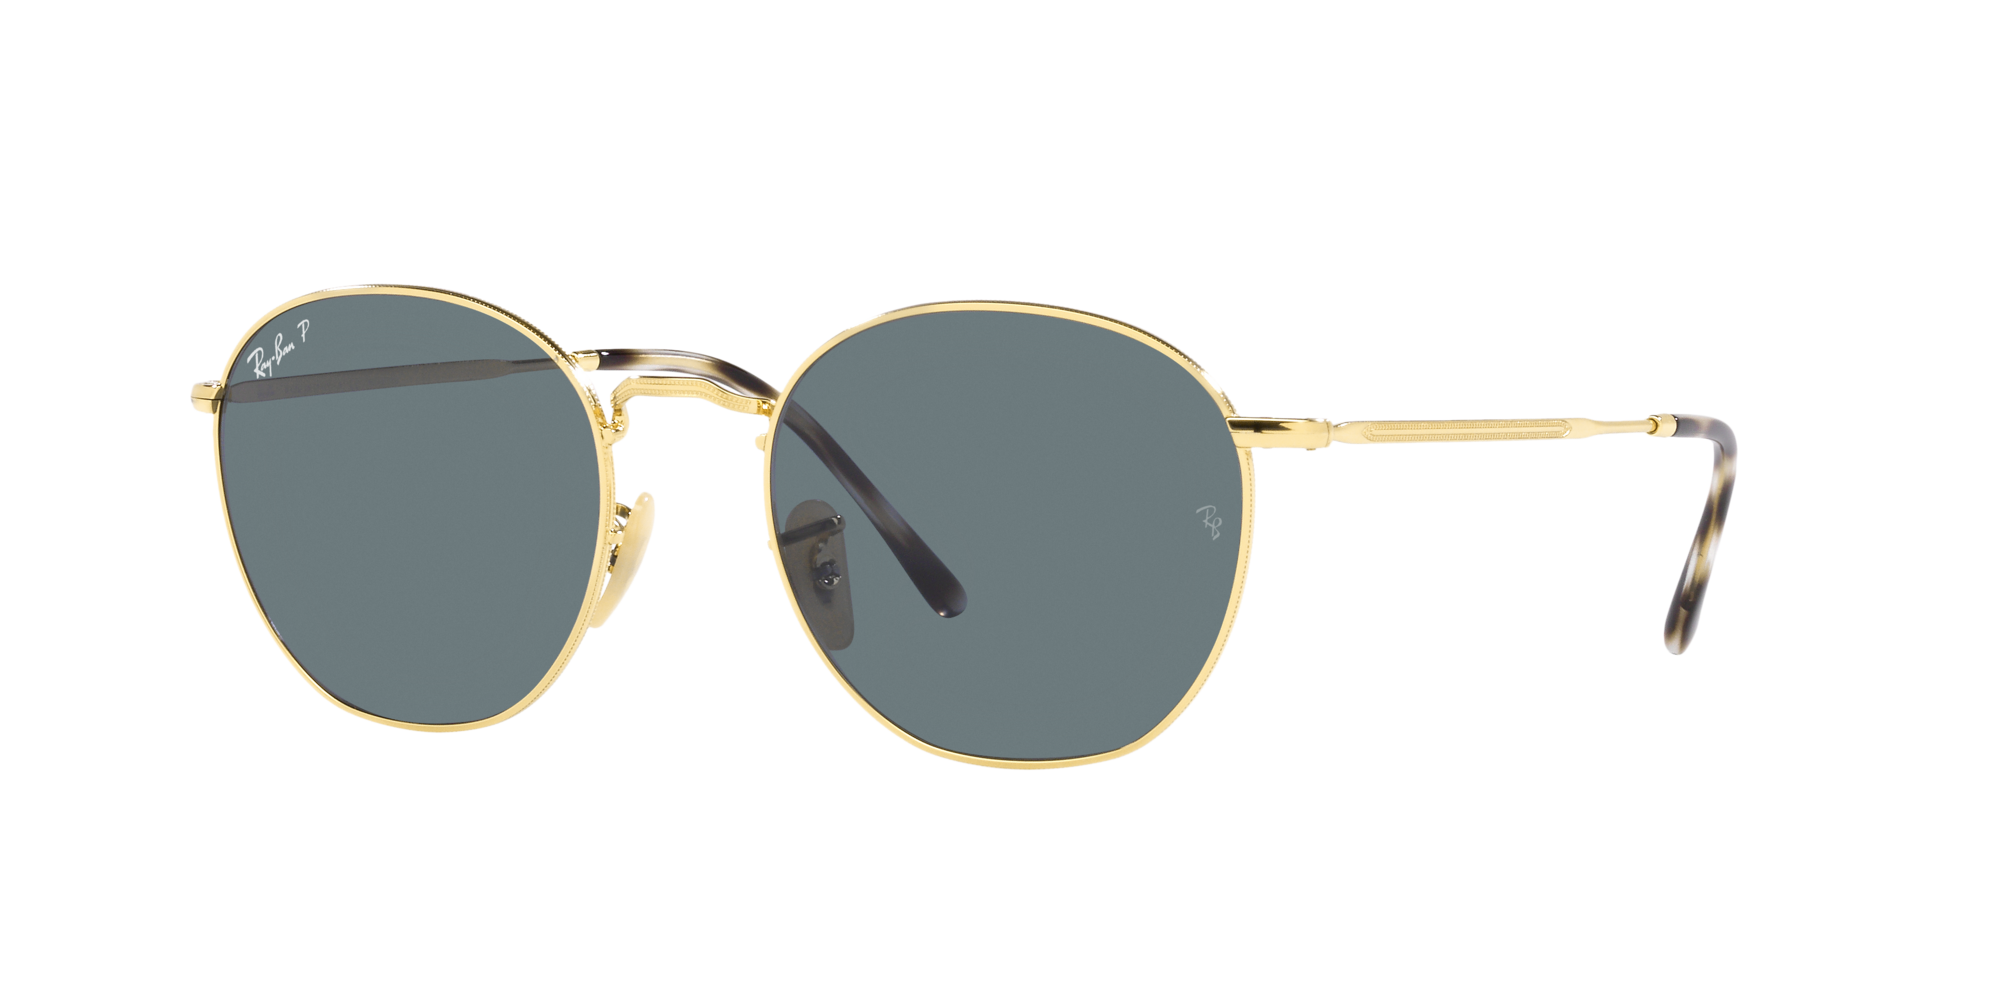 Rob Ray-Ban Unisex Sonnenbrille in Gold RB3772 001/3R 54